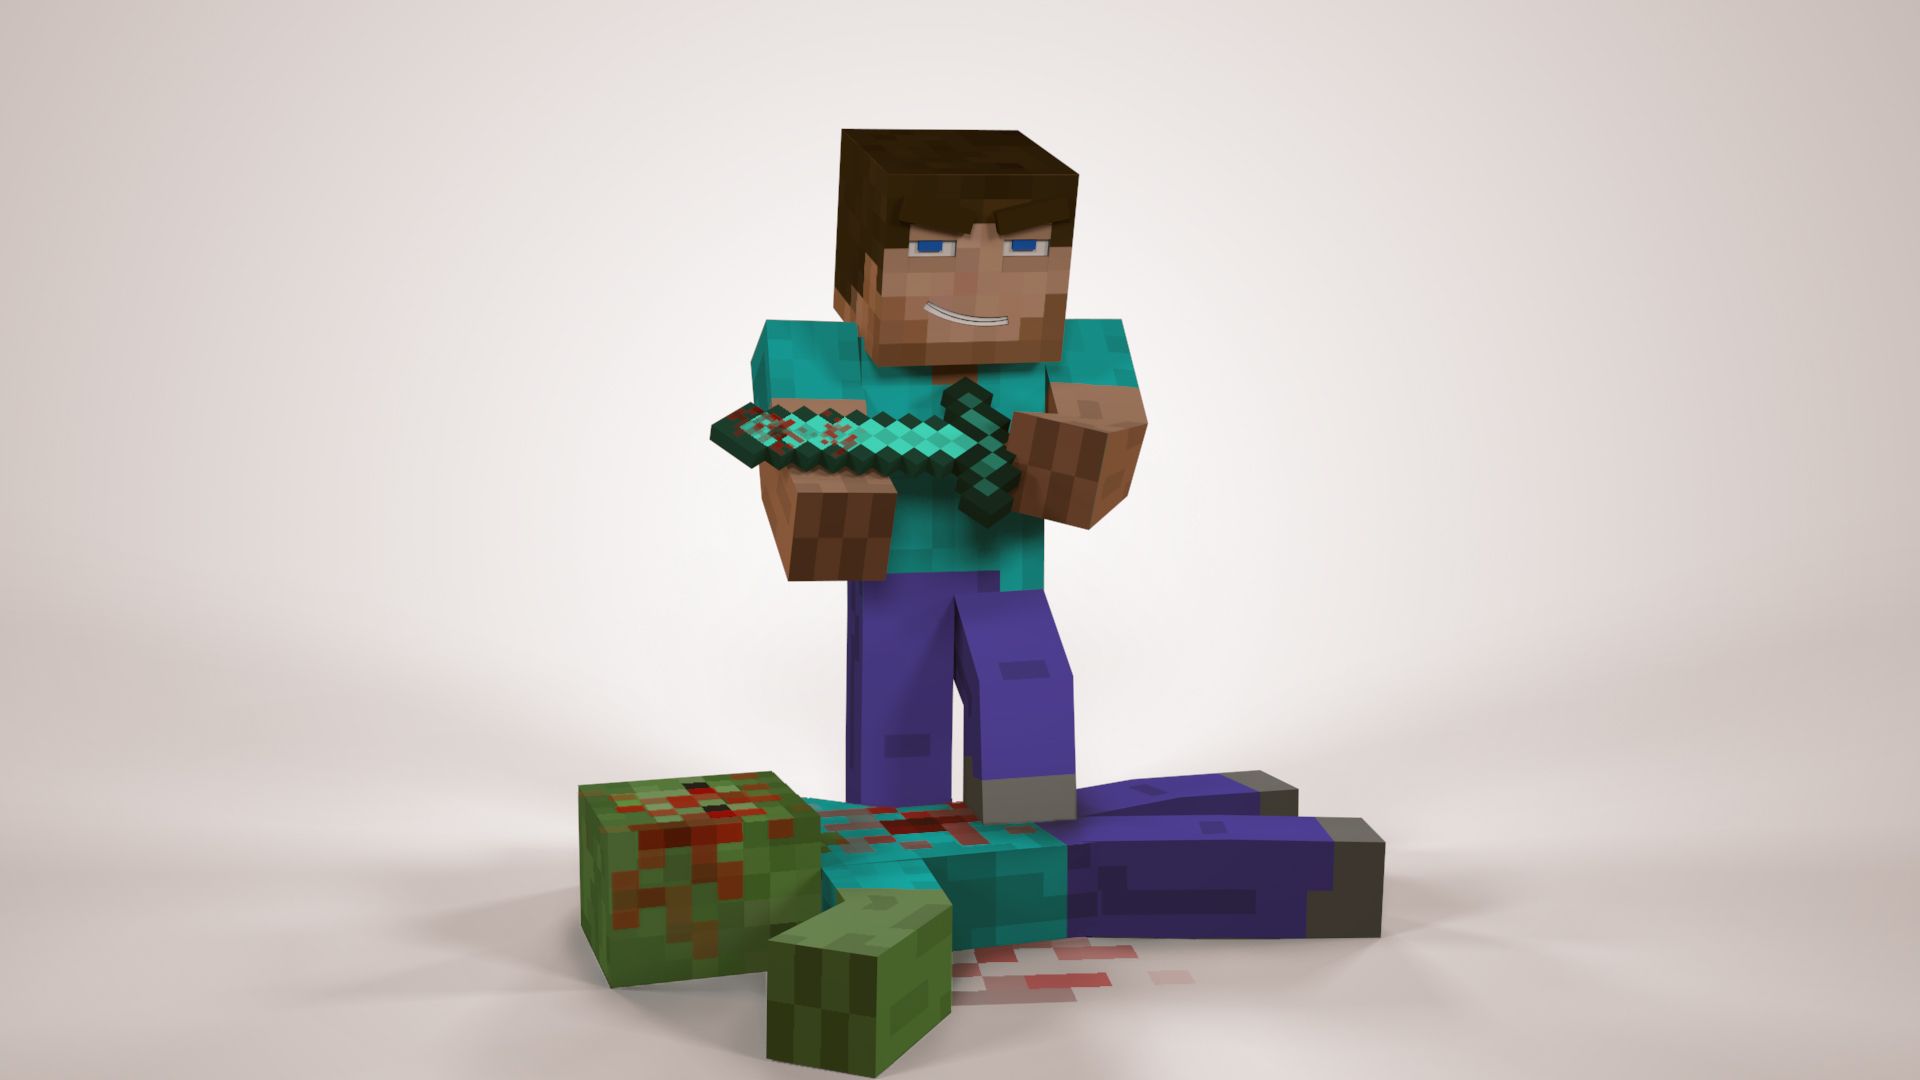 20 Steve Minecraft HD Wallpapers and Backgrounds